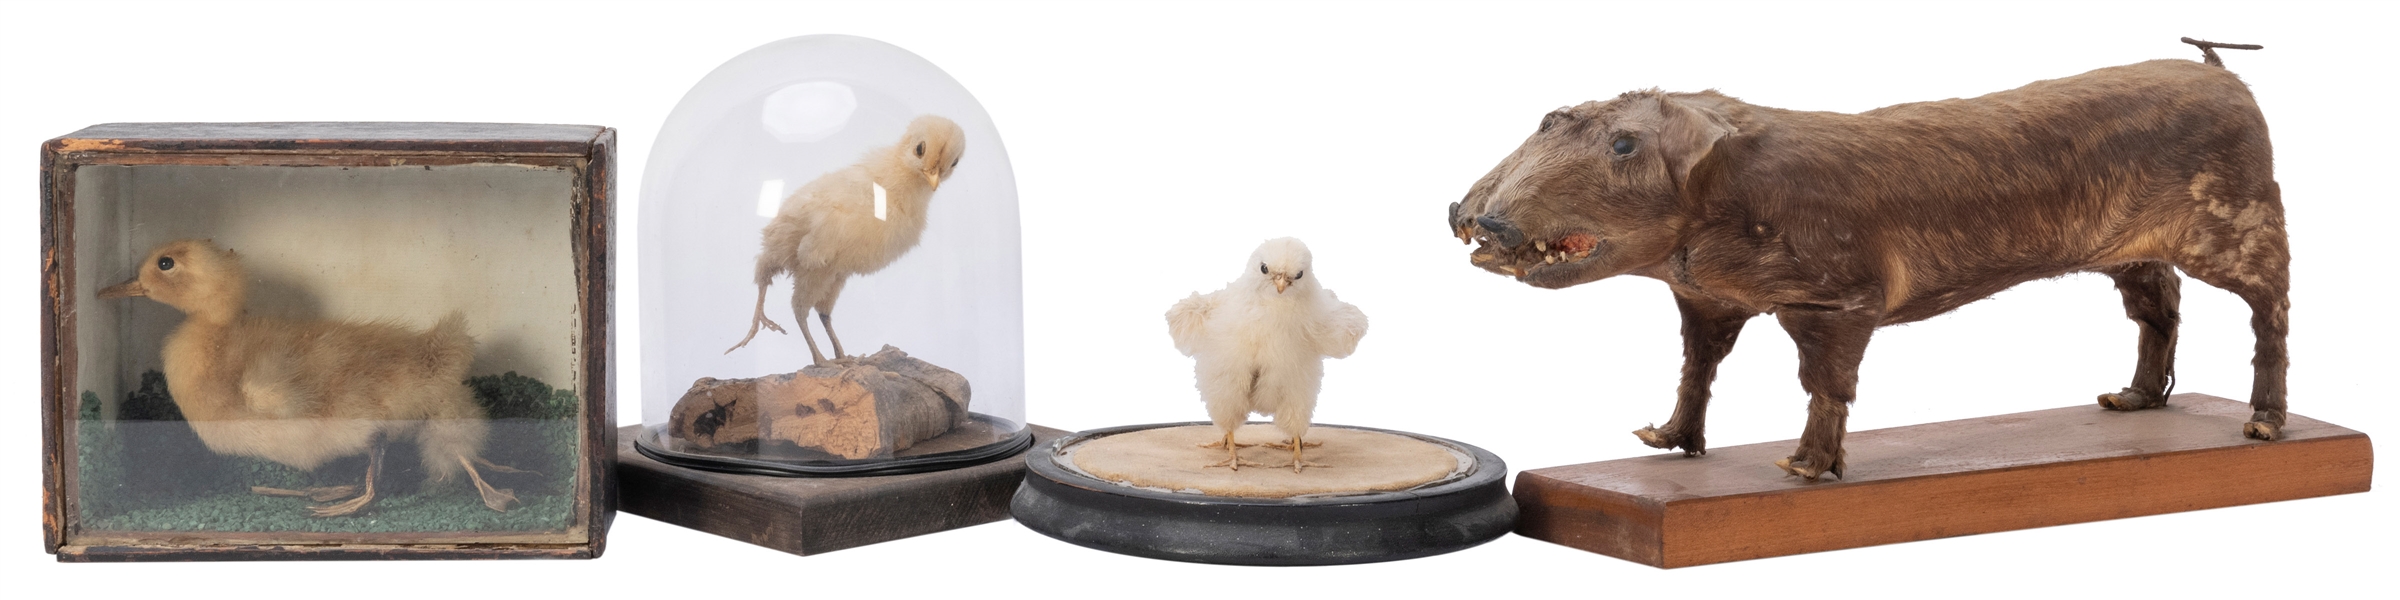  Group of Freak Taxidermy Displays. Including (3) chicks wit...